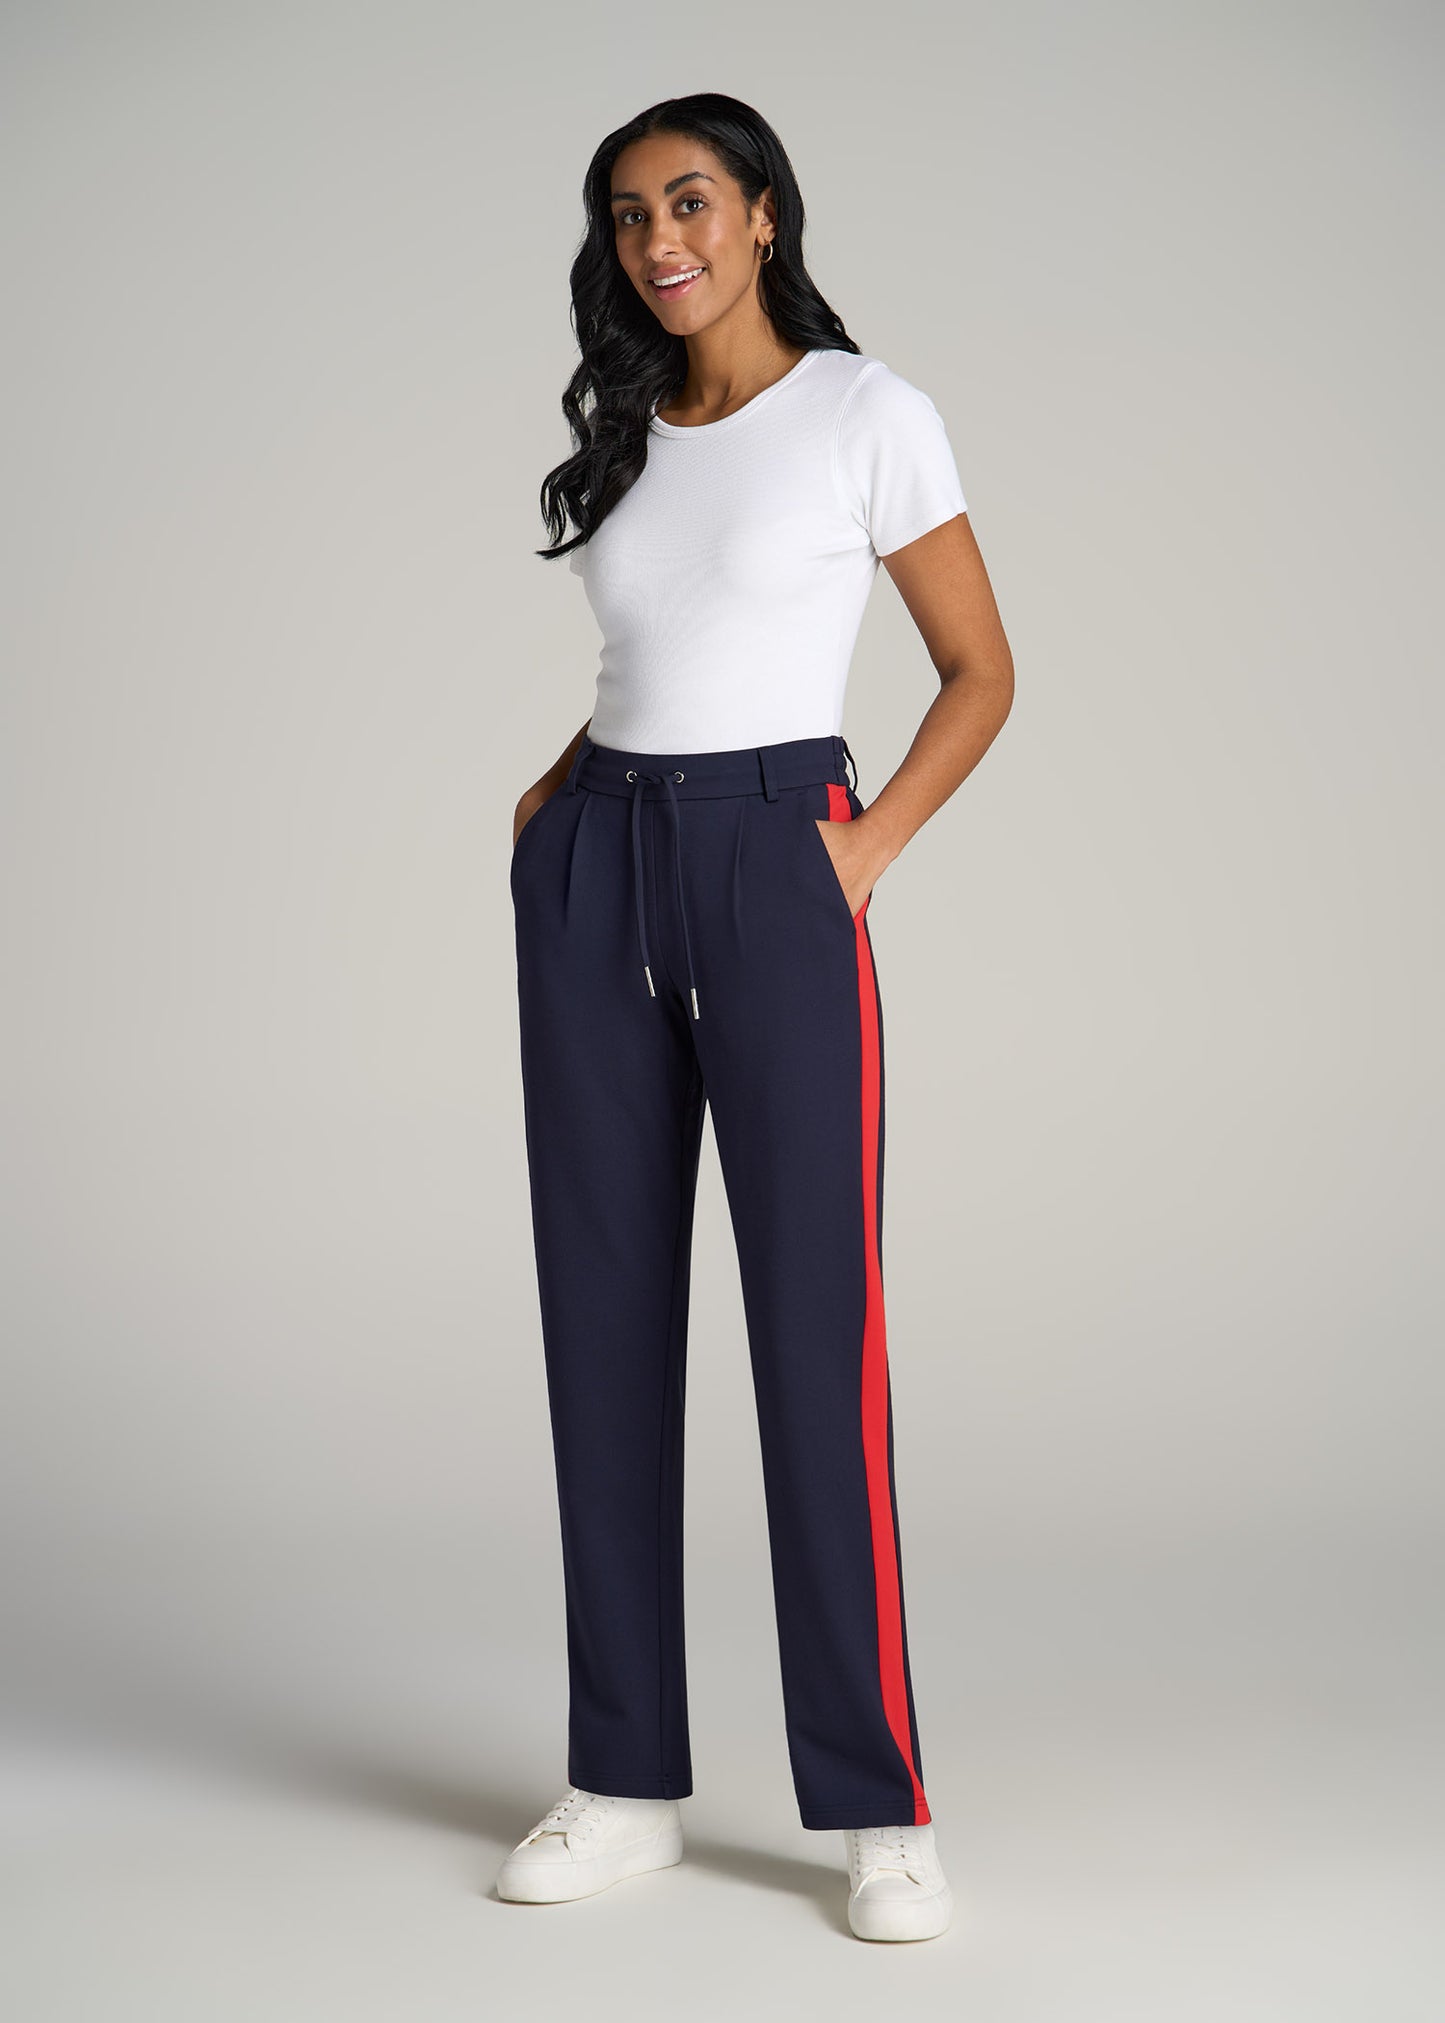 Pull On Tuxedo Stripe Pants for Tall Women in True Navy and Radiant Red